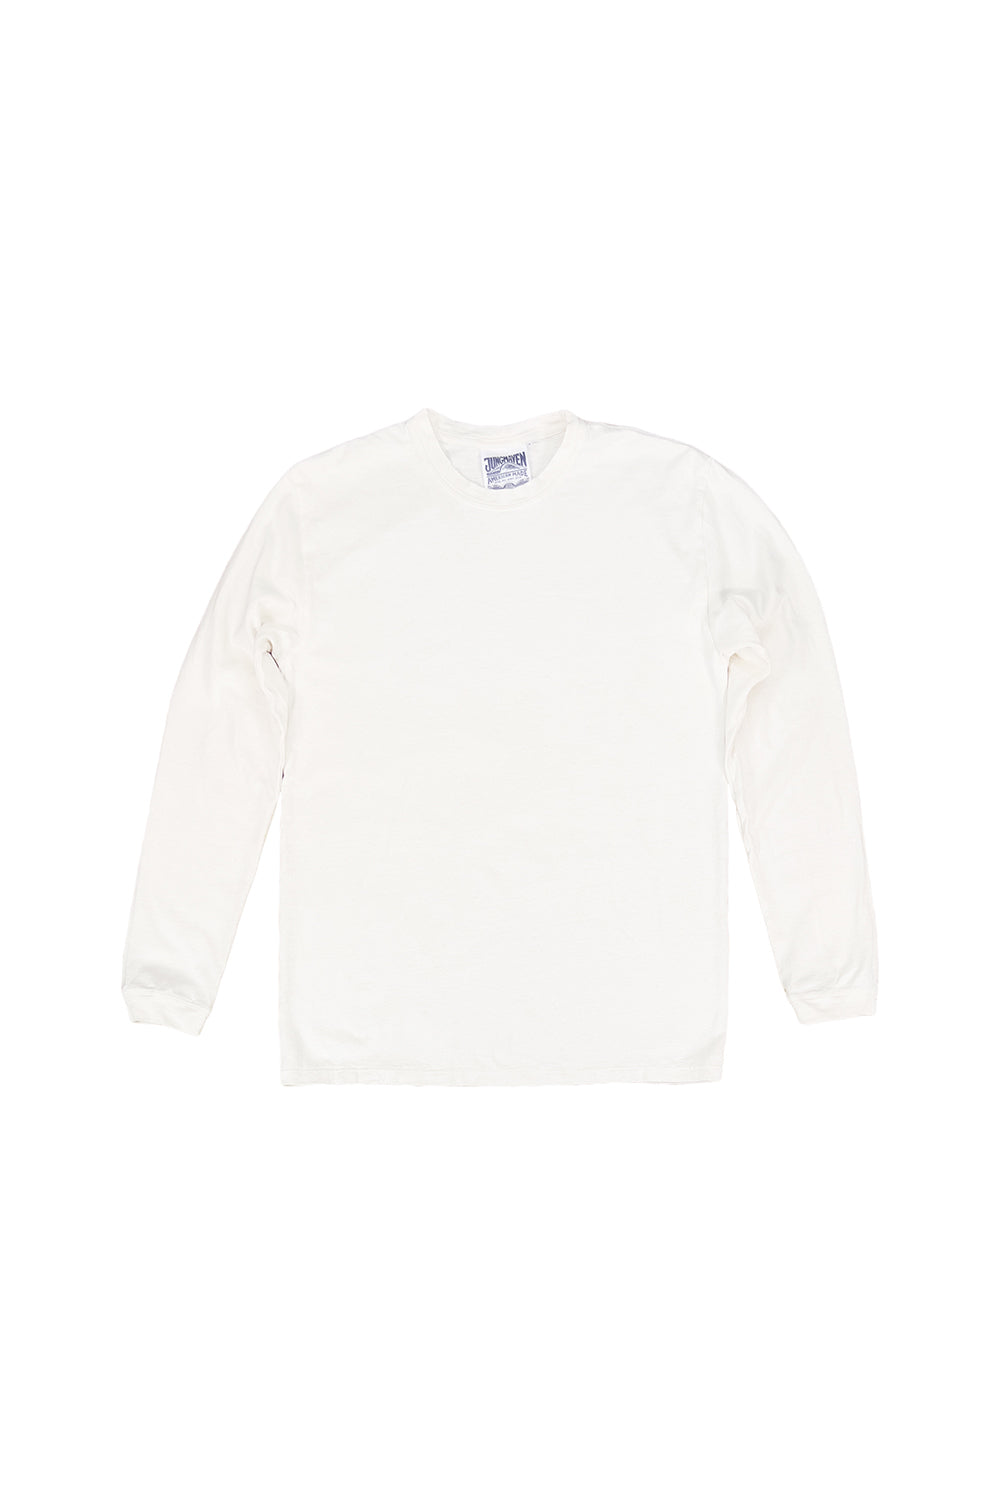 Baja Long Sleeve Tee | Jungmaven Hemp Clothing & Accessories / Color: Washed White